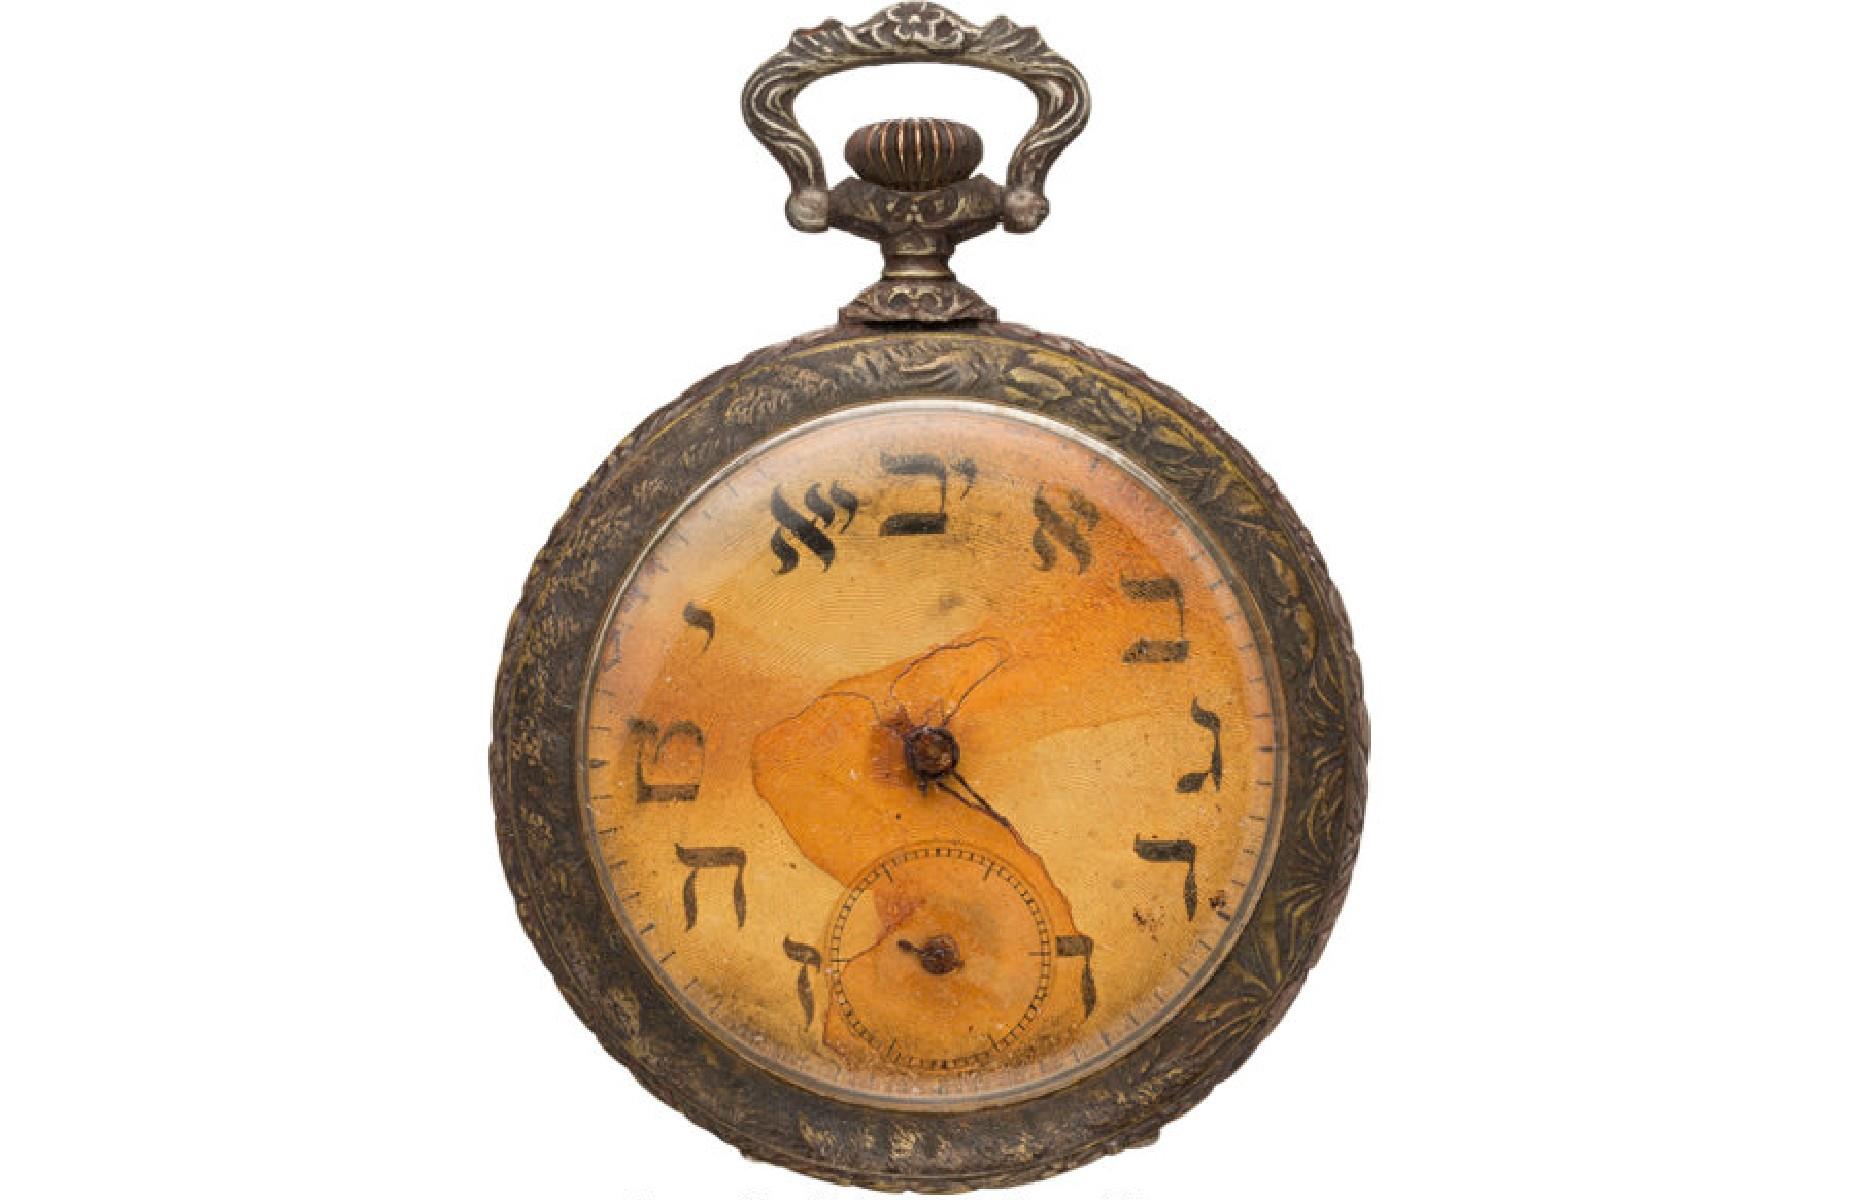 <p>Women and children were given priority in the scramble to board lifeboats in the early hours of 15 April, which separated hundreds of couples and families. This pocket watch was found with Russian passenger Sinai Kantor, who tragically died in the icy waters after successfully helping his wife Miriam onto lifeboat number 12. The couple had purchased two second-class tickets for the voyage to New York at a cost of around £26, which is equivalent to just over £3,000 ($4.2k) today. The watch was put up for auction by Heritage Auctions in 2018 and the winning bid of $57,500 was made by John Miottel, who collects timepieces linked to the catastrophe. </p>